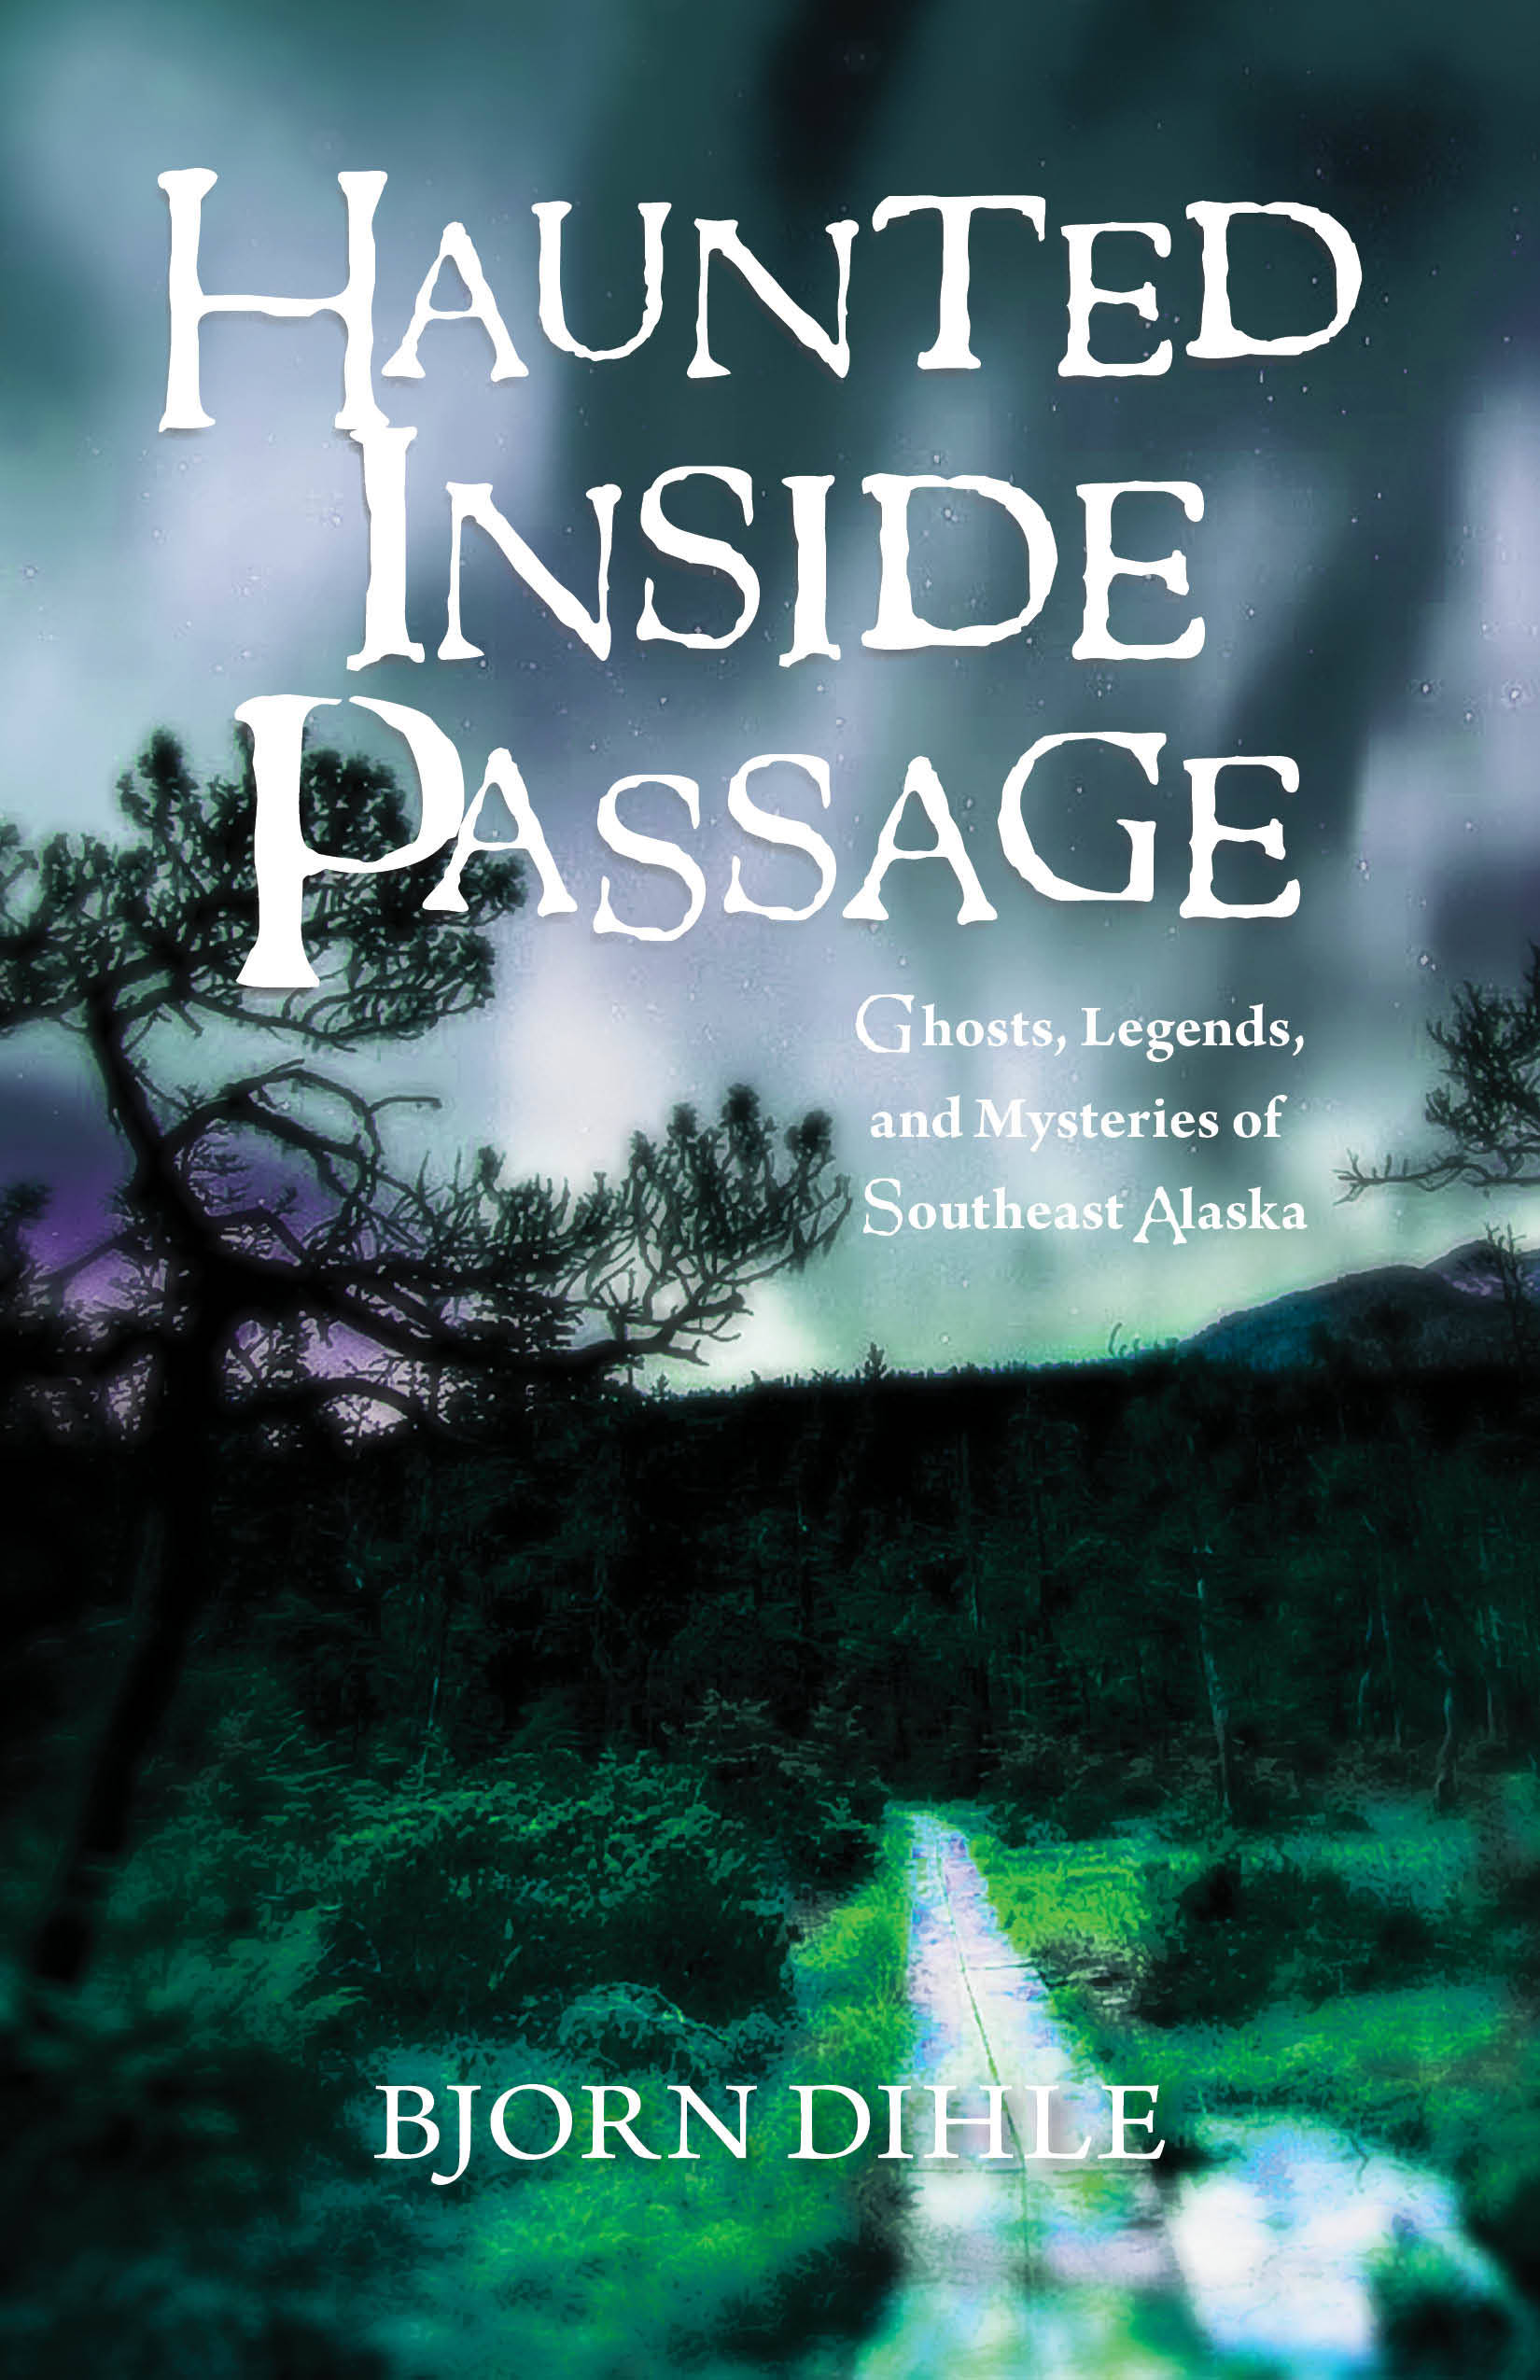 Book cover of Bjorn Dihle’s first book “Haunted Inside Passage.” Courtesy image.